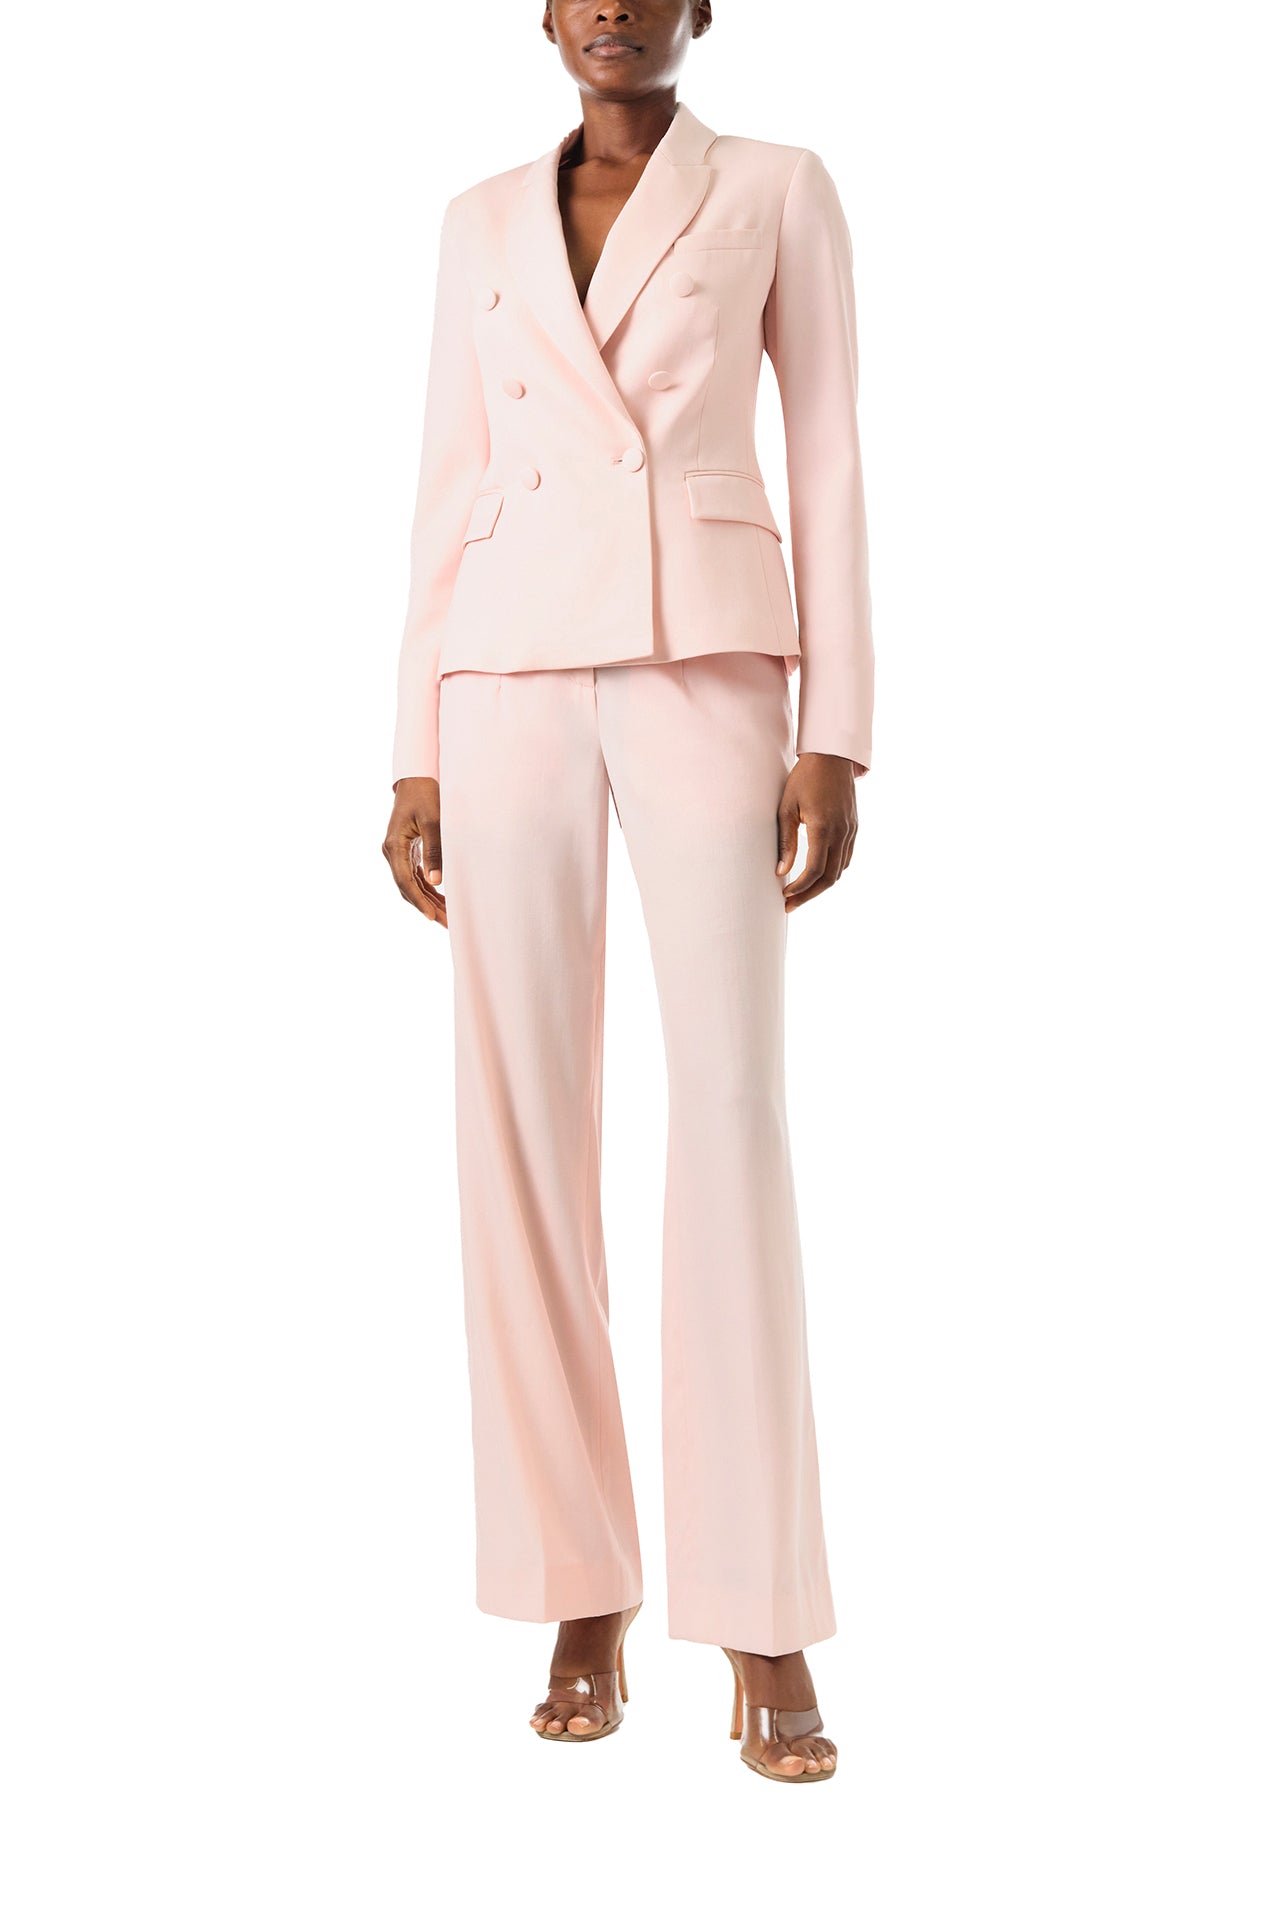 Monique Lhuillier Fall 2024 pale blush wool, straight leg trouser with pockets - front with pale blush blazer.